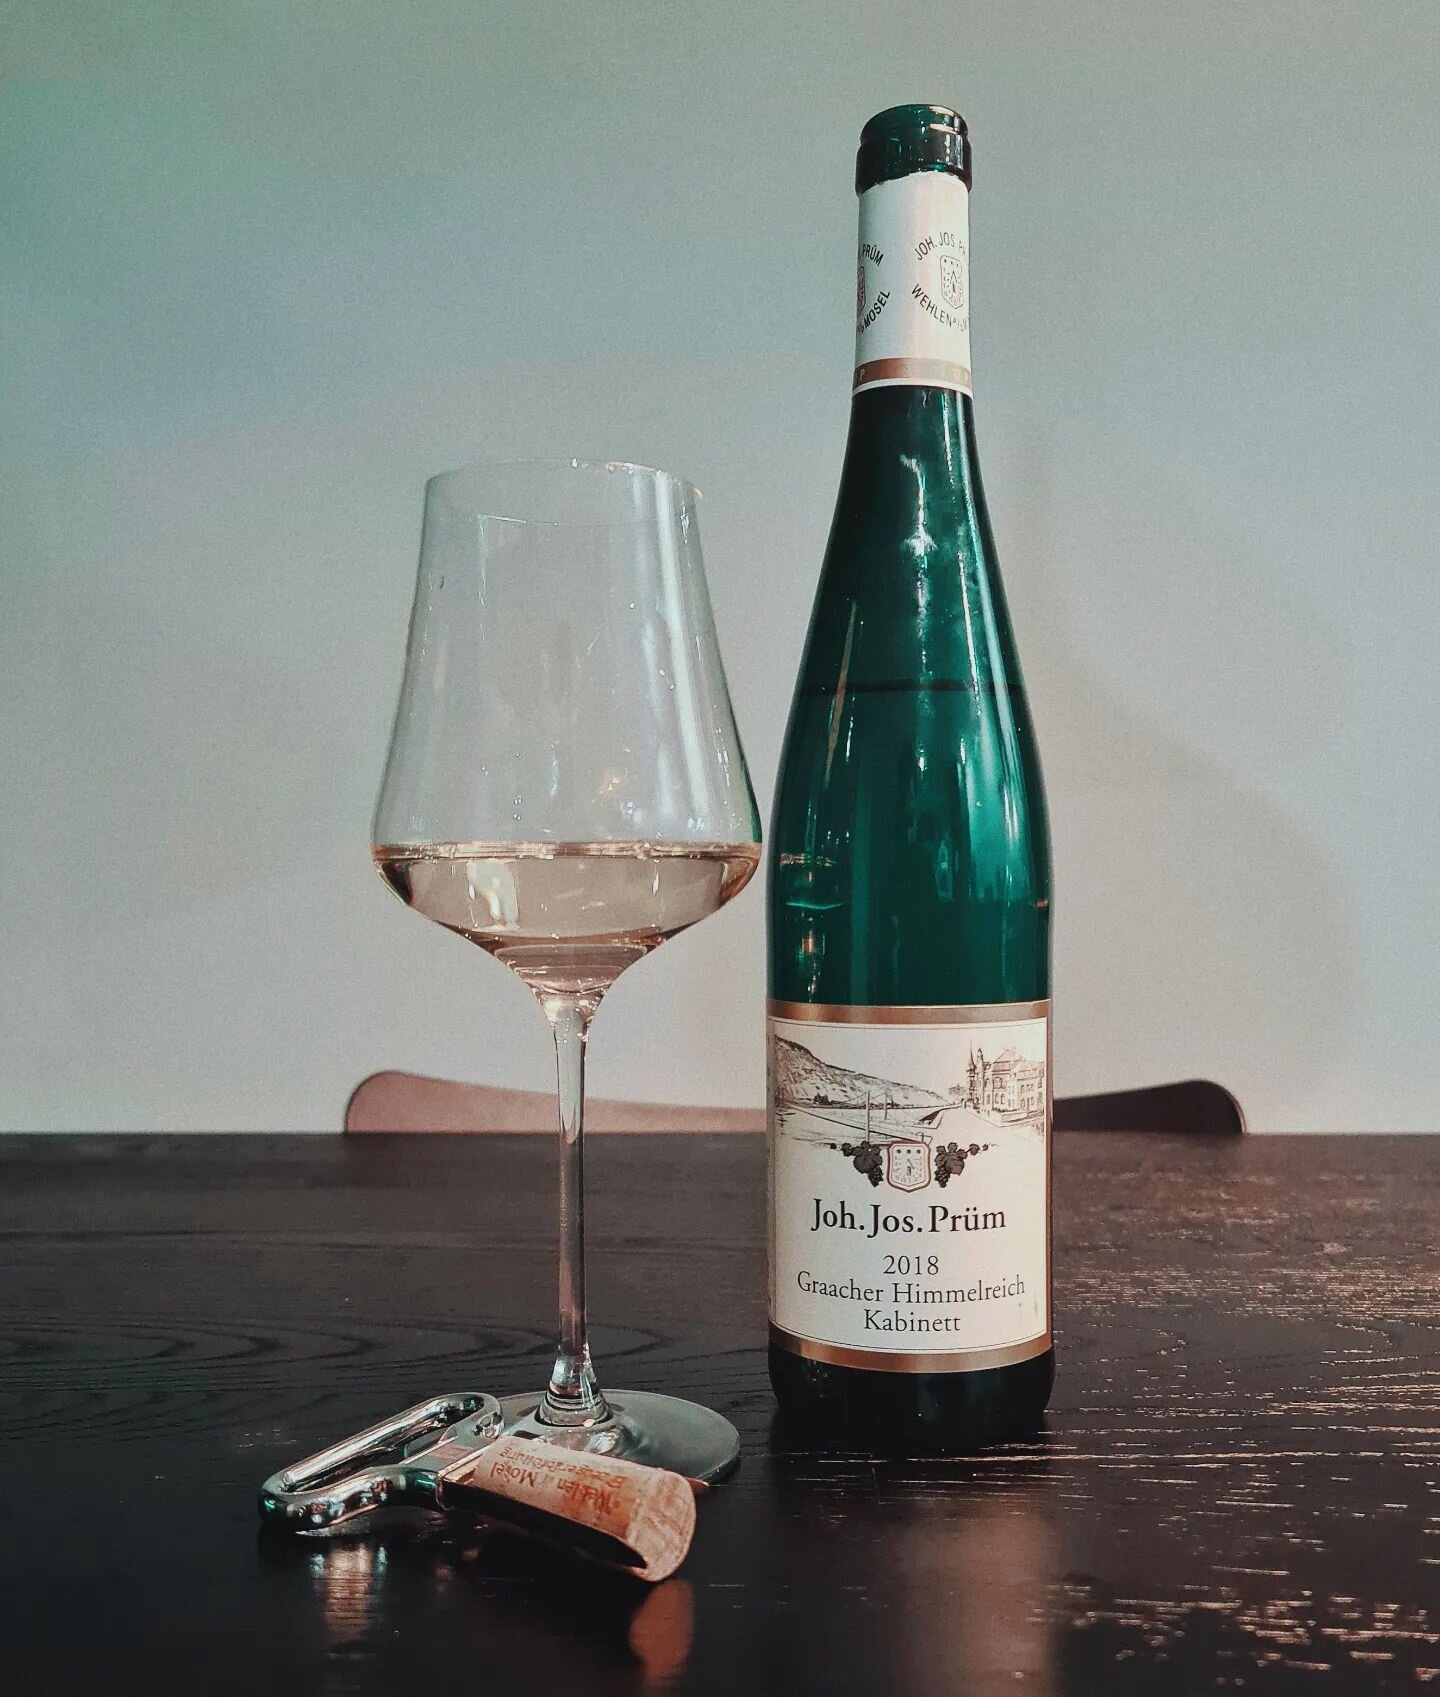 There's a certain joy I've only known when drinking Joh Jos Pr&uuml;m. It's insatiable with crystalline energy and purity. There's notes of honeysuckle, crushed slate, jasmine tea and lemon preserve on the nose with layers of honey, apricot, flint an